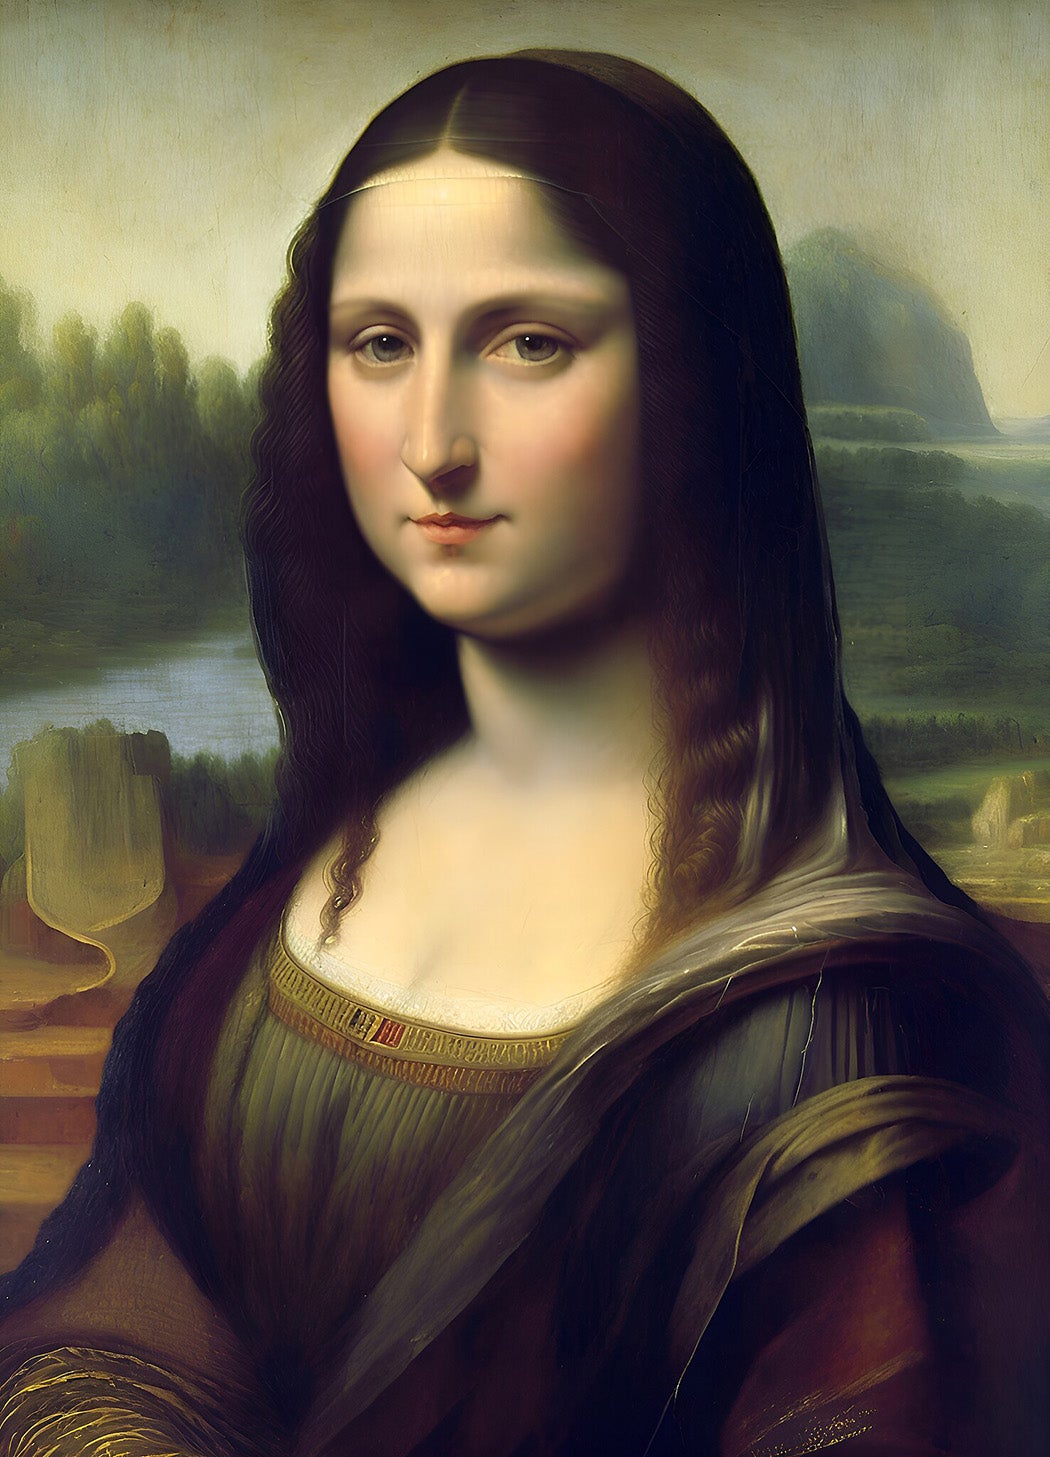 A rendition of the Mona Lisa by Midjourney AI. Created with the prompt "Oil painting of the Mona Lisa by Leonardo DaVinci".